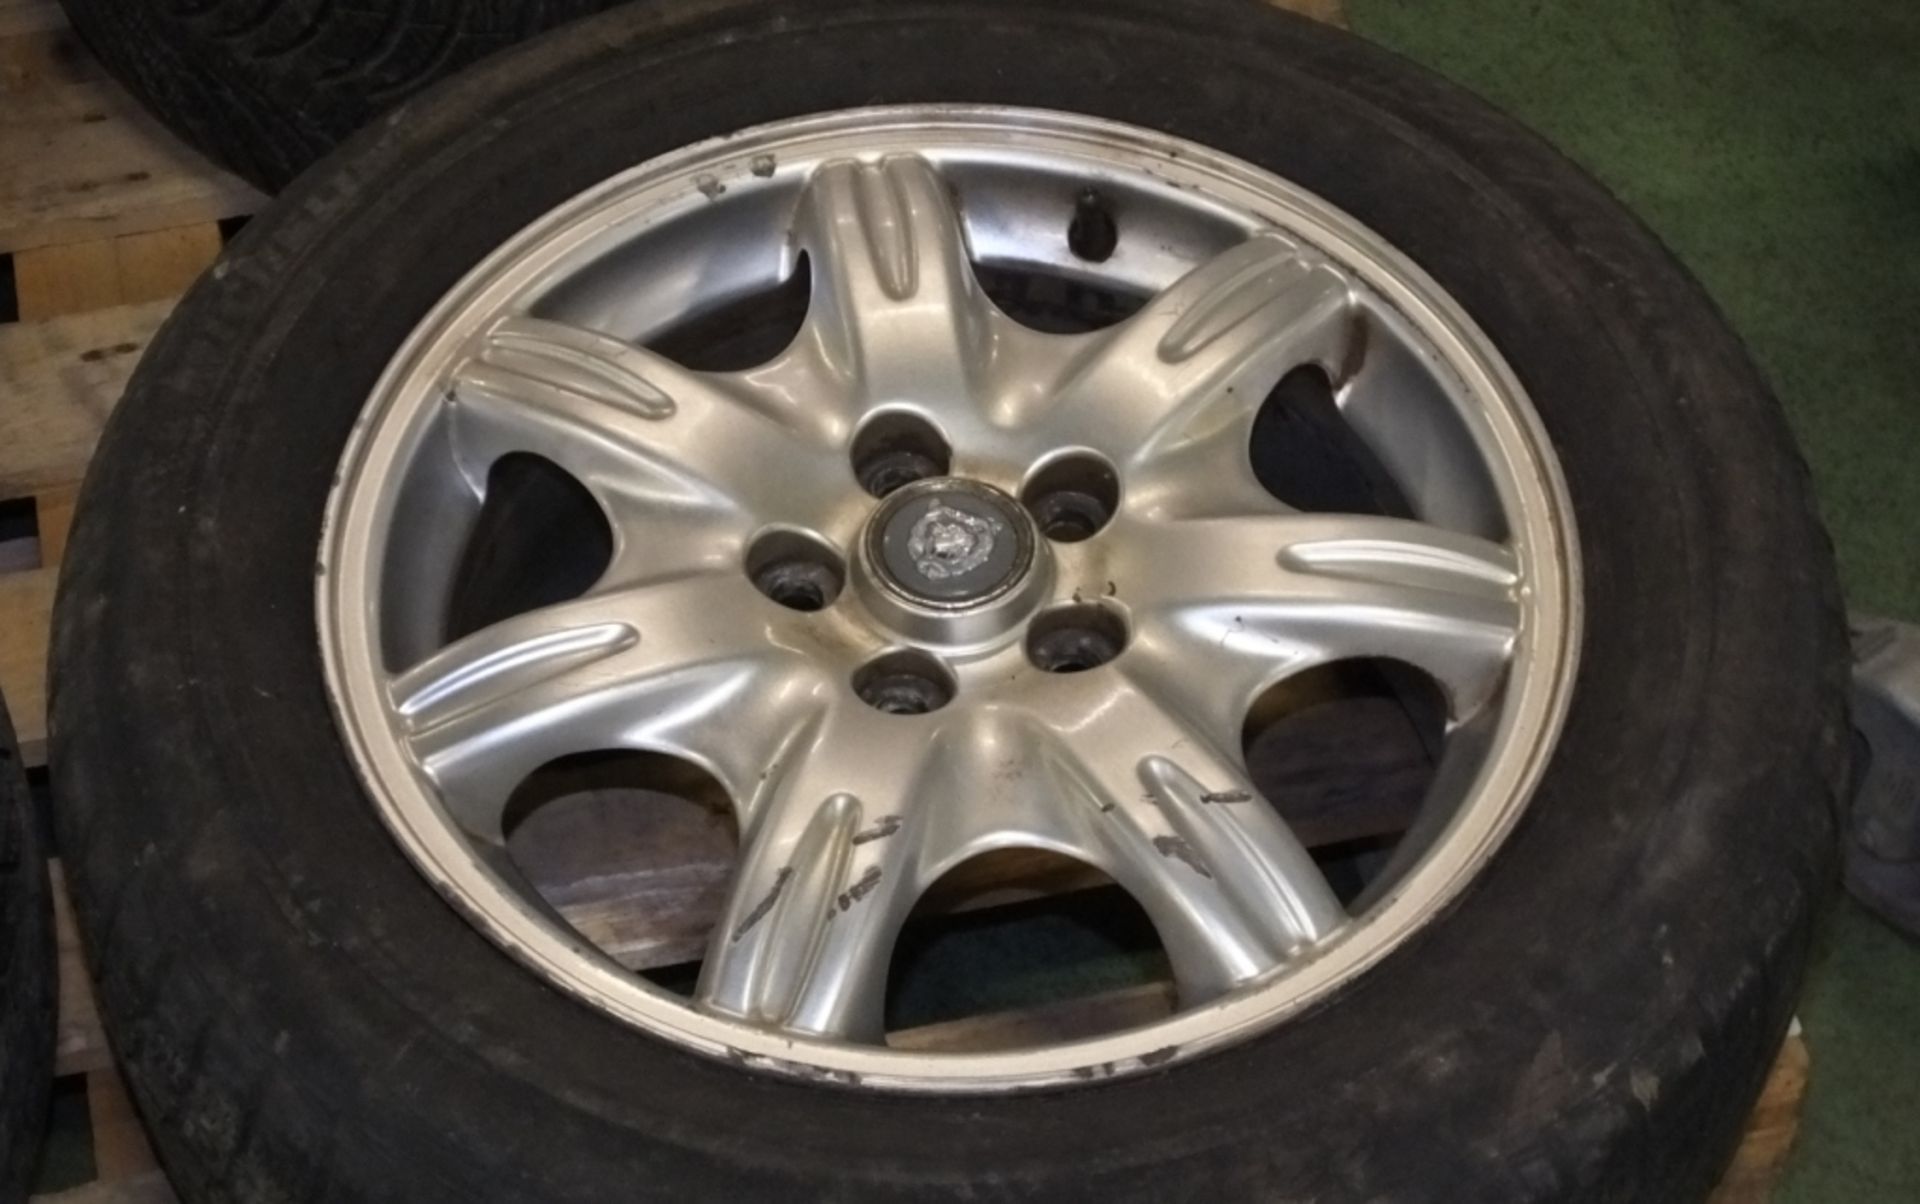 4 Jaguar 225/55 R16 alloy wheels with Jaguar centre caps - Please note there will be a loa - Image 2 of 2